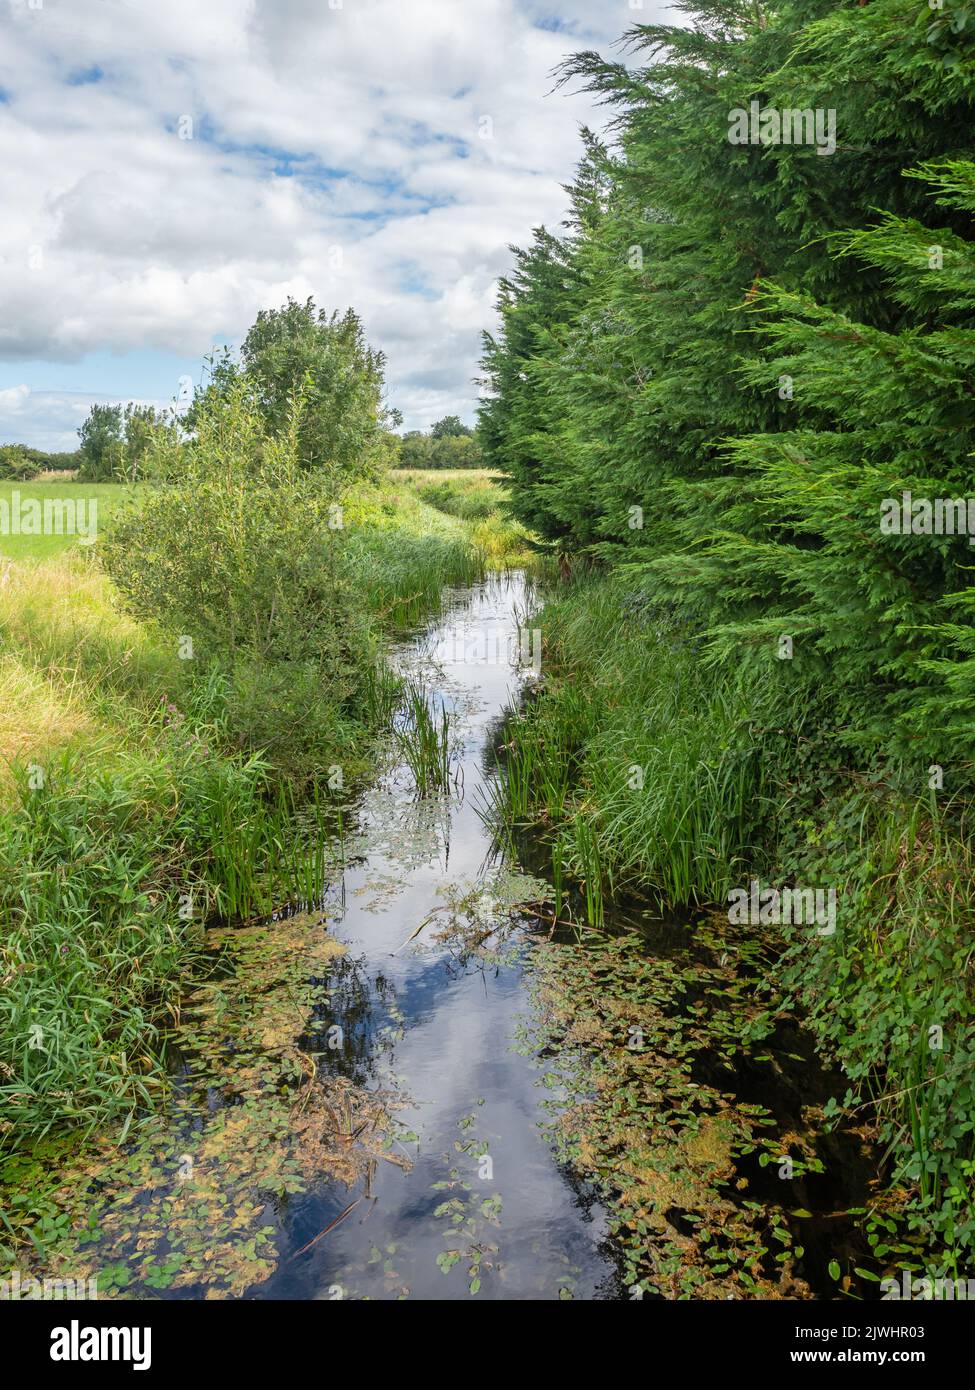 A stream in the Cloughanover district near Headford in County Galway, Ireland. Stock Photo